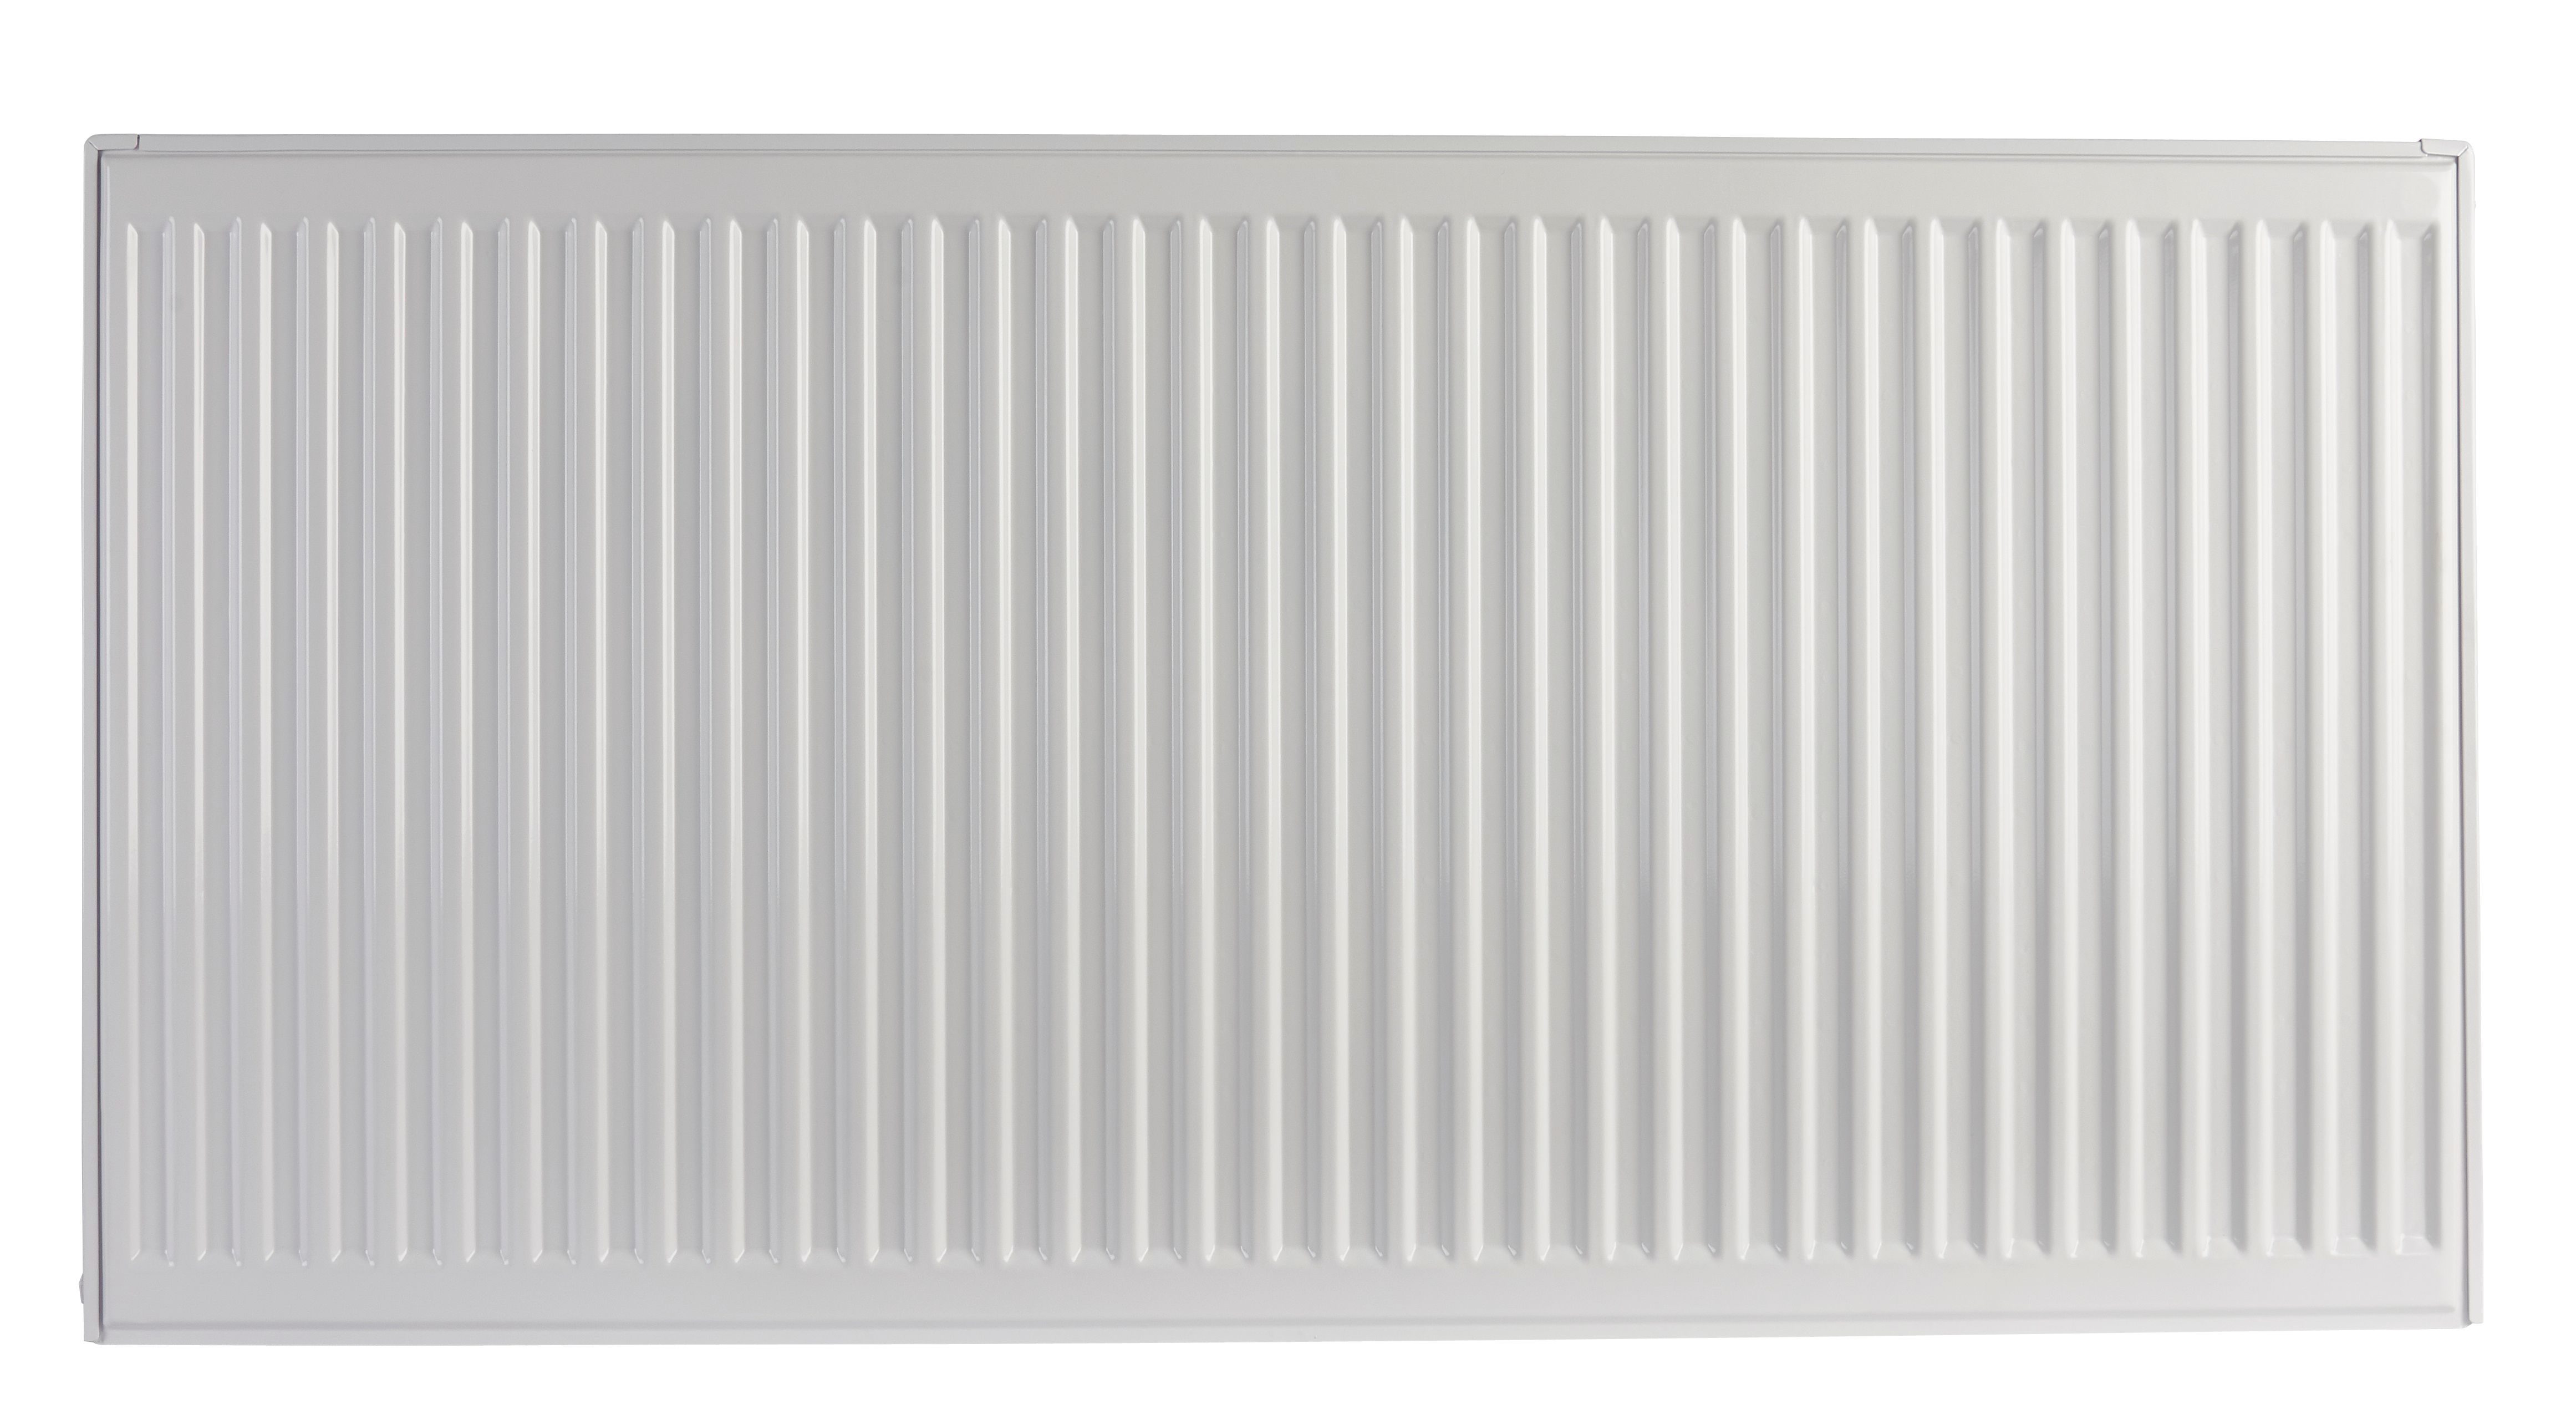 Image of Homeline by Stelrad 600 x 900mm Type 11 Single Panel Single Convector Radiator